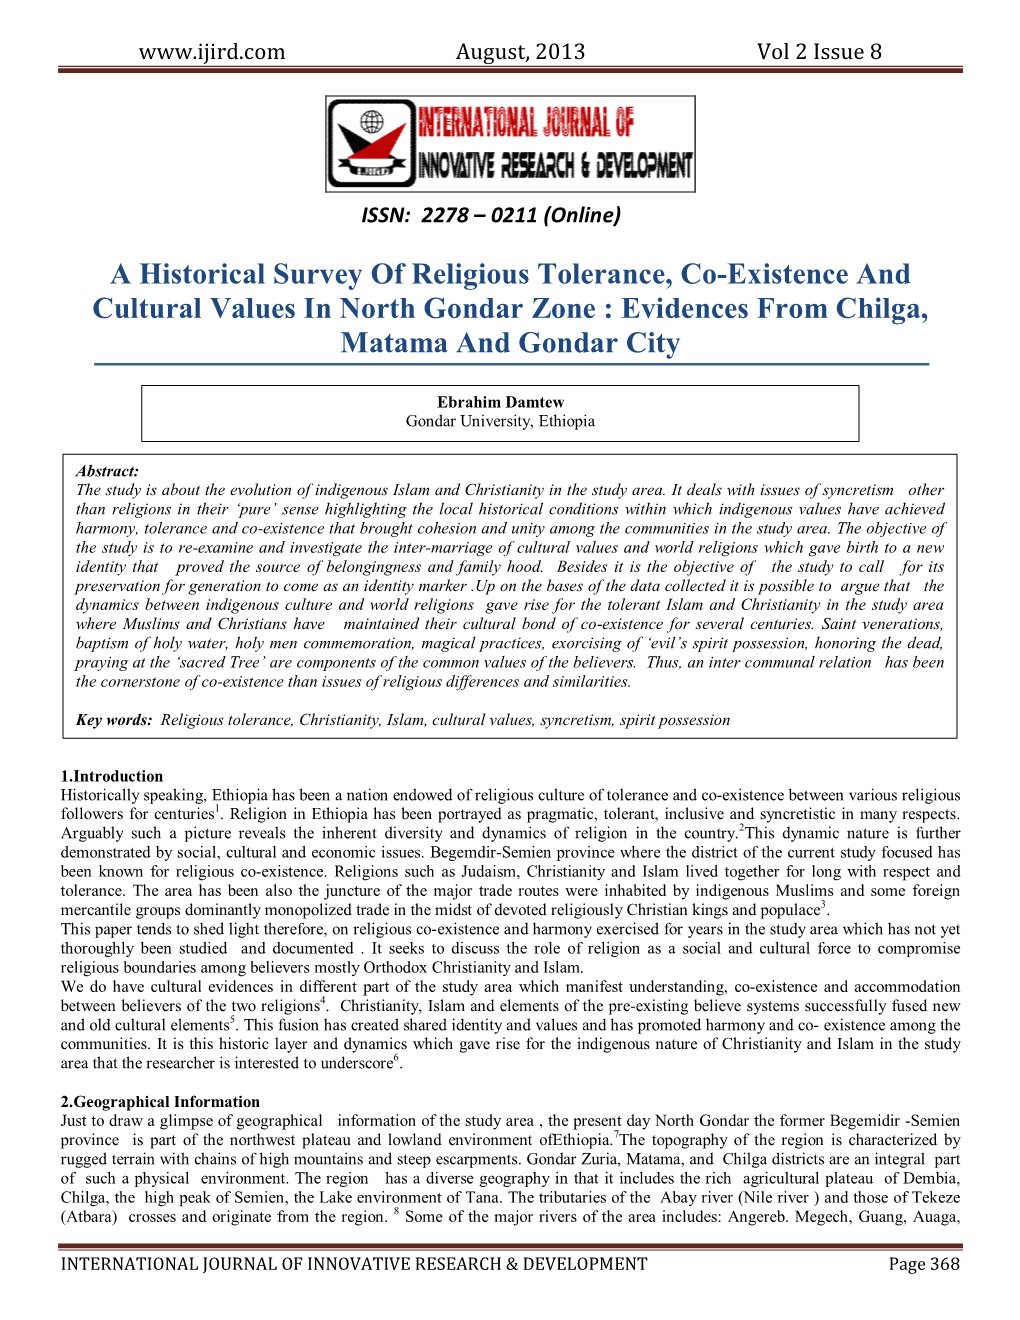 A Historical Survey of Religious Tolerance, Co-Existence and Cultural Values in North Gondar Zone : Evidences from Chilga, Matama and Gondar City